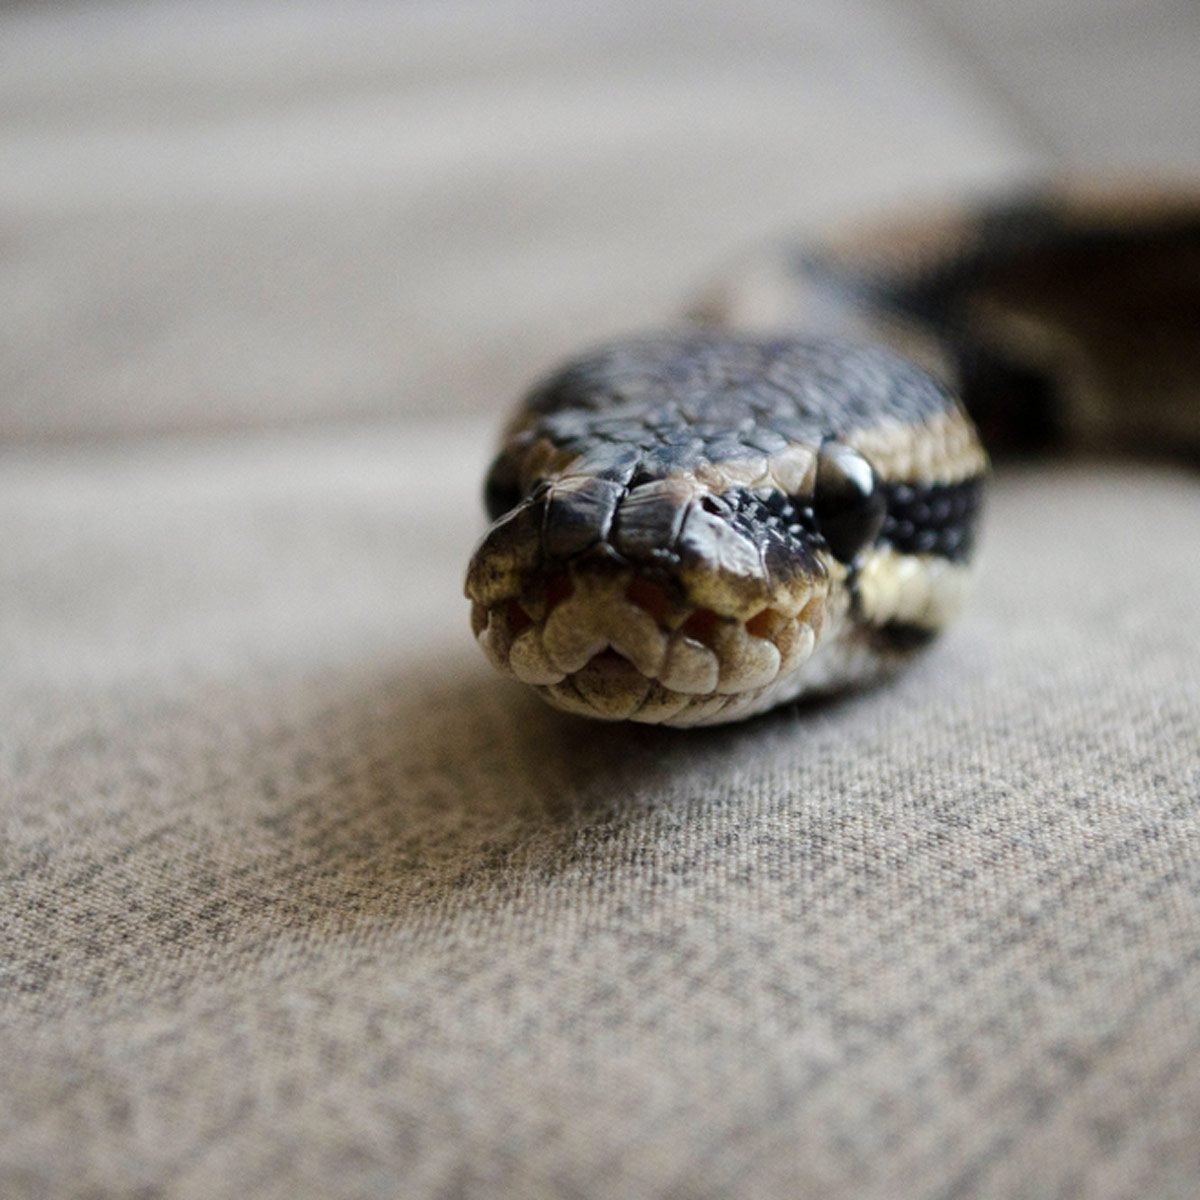 5 Frightening Ways Snakes Can Enter Your Home